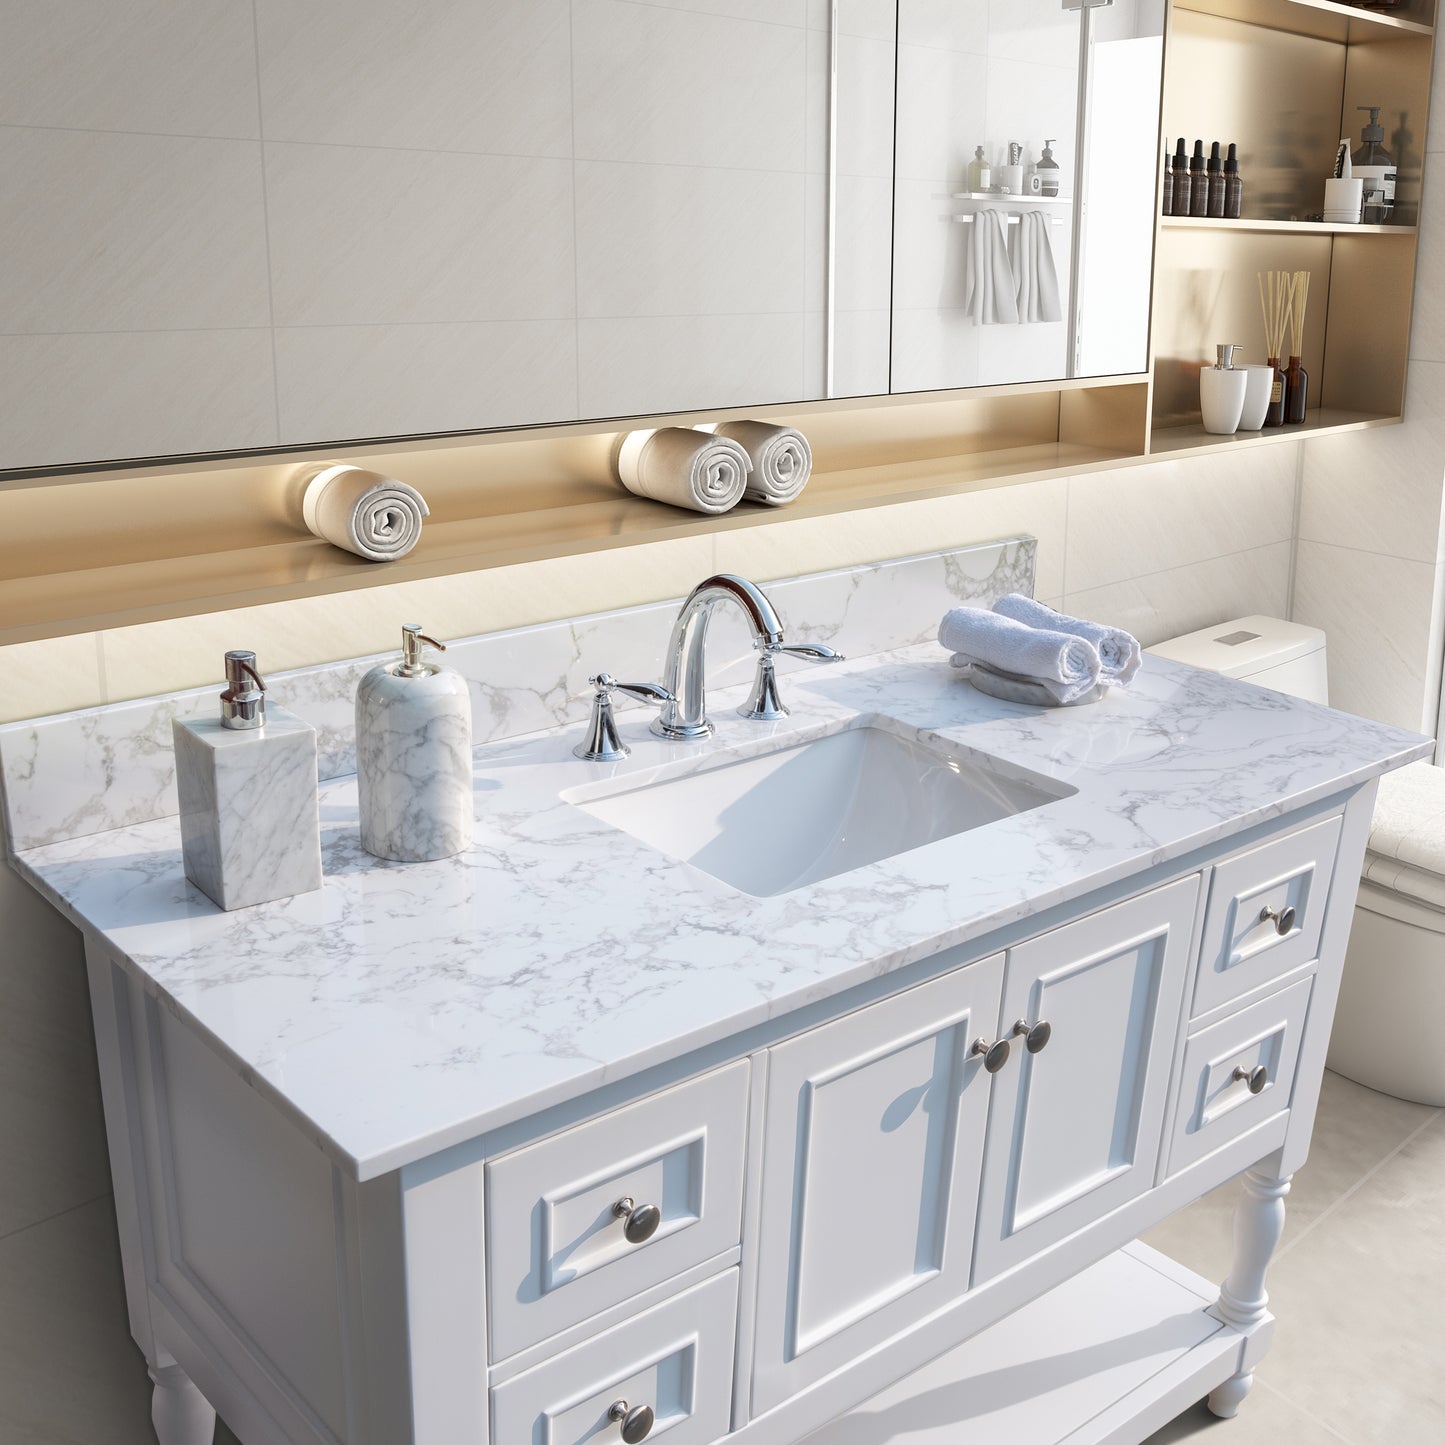 Montary 43‘’x22" bathroom stone vanity top  engineered stone carrara white marble color with rectangle undermount ceramic sink and  3 faucet hole with back splash .